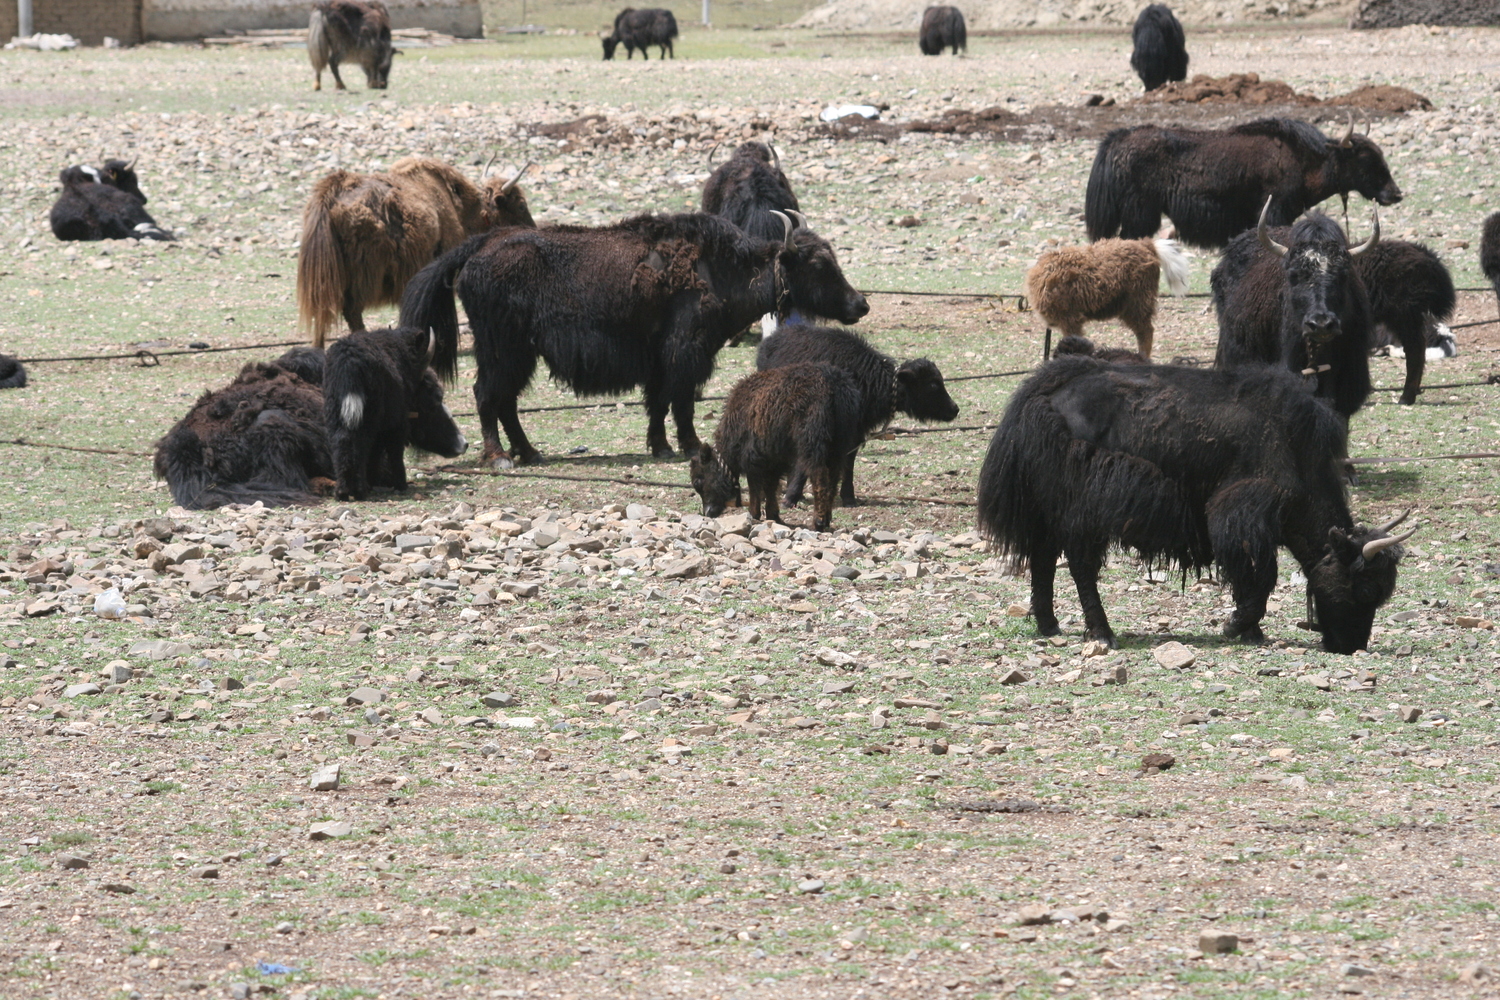 Intensive grazing, especially near settlements, leads to erosion of the fertile topsoil.